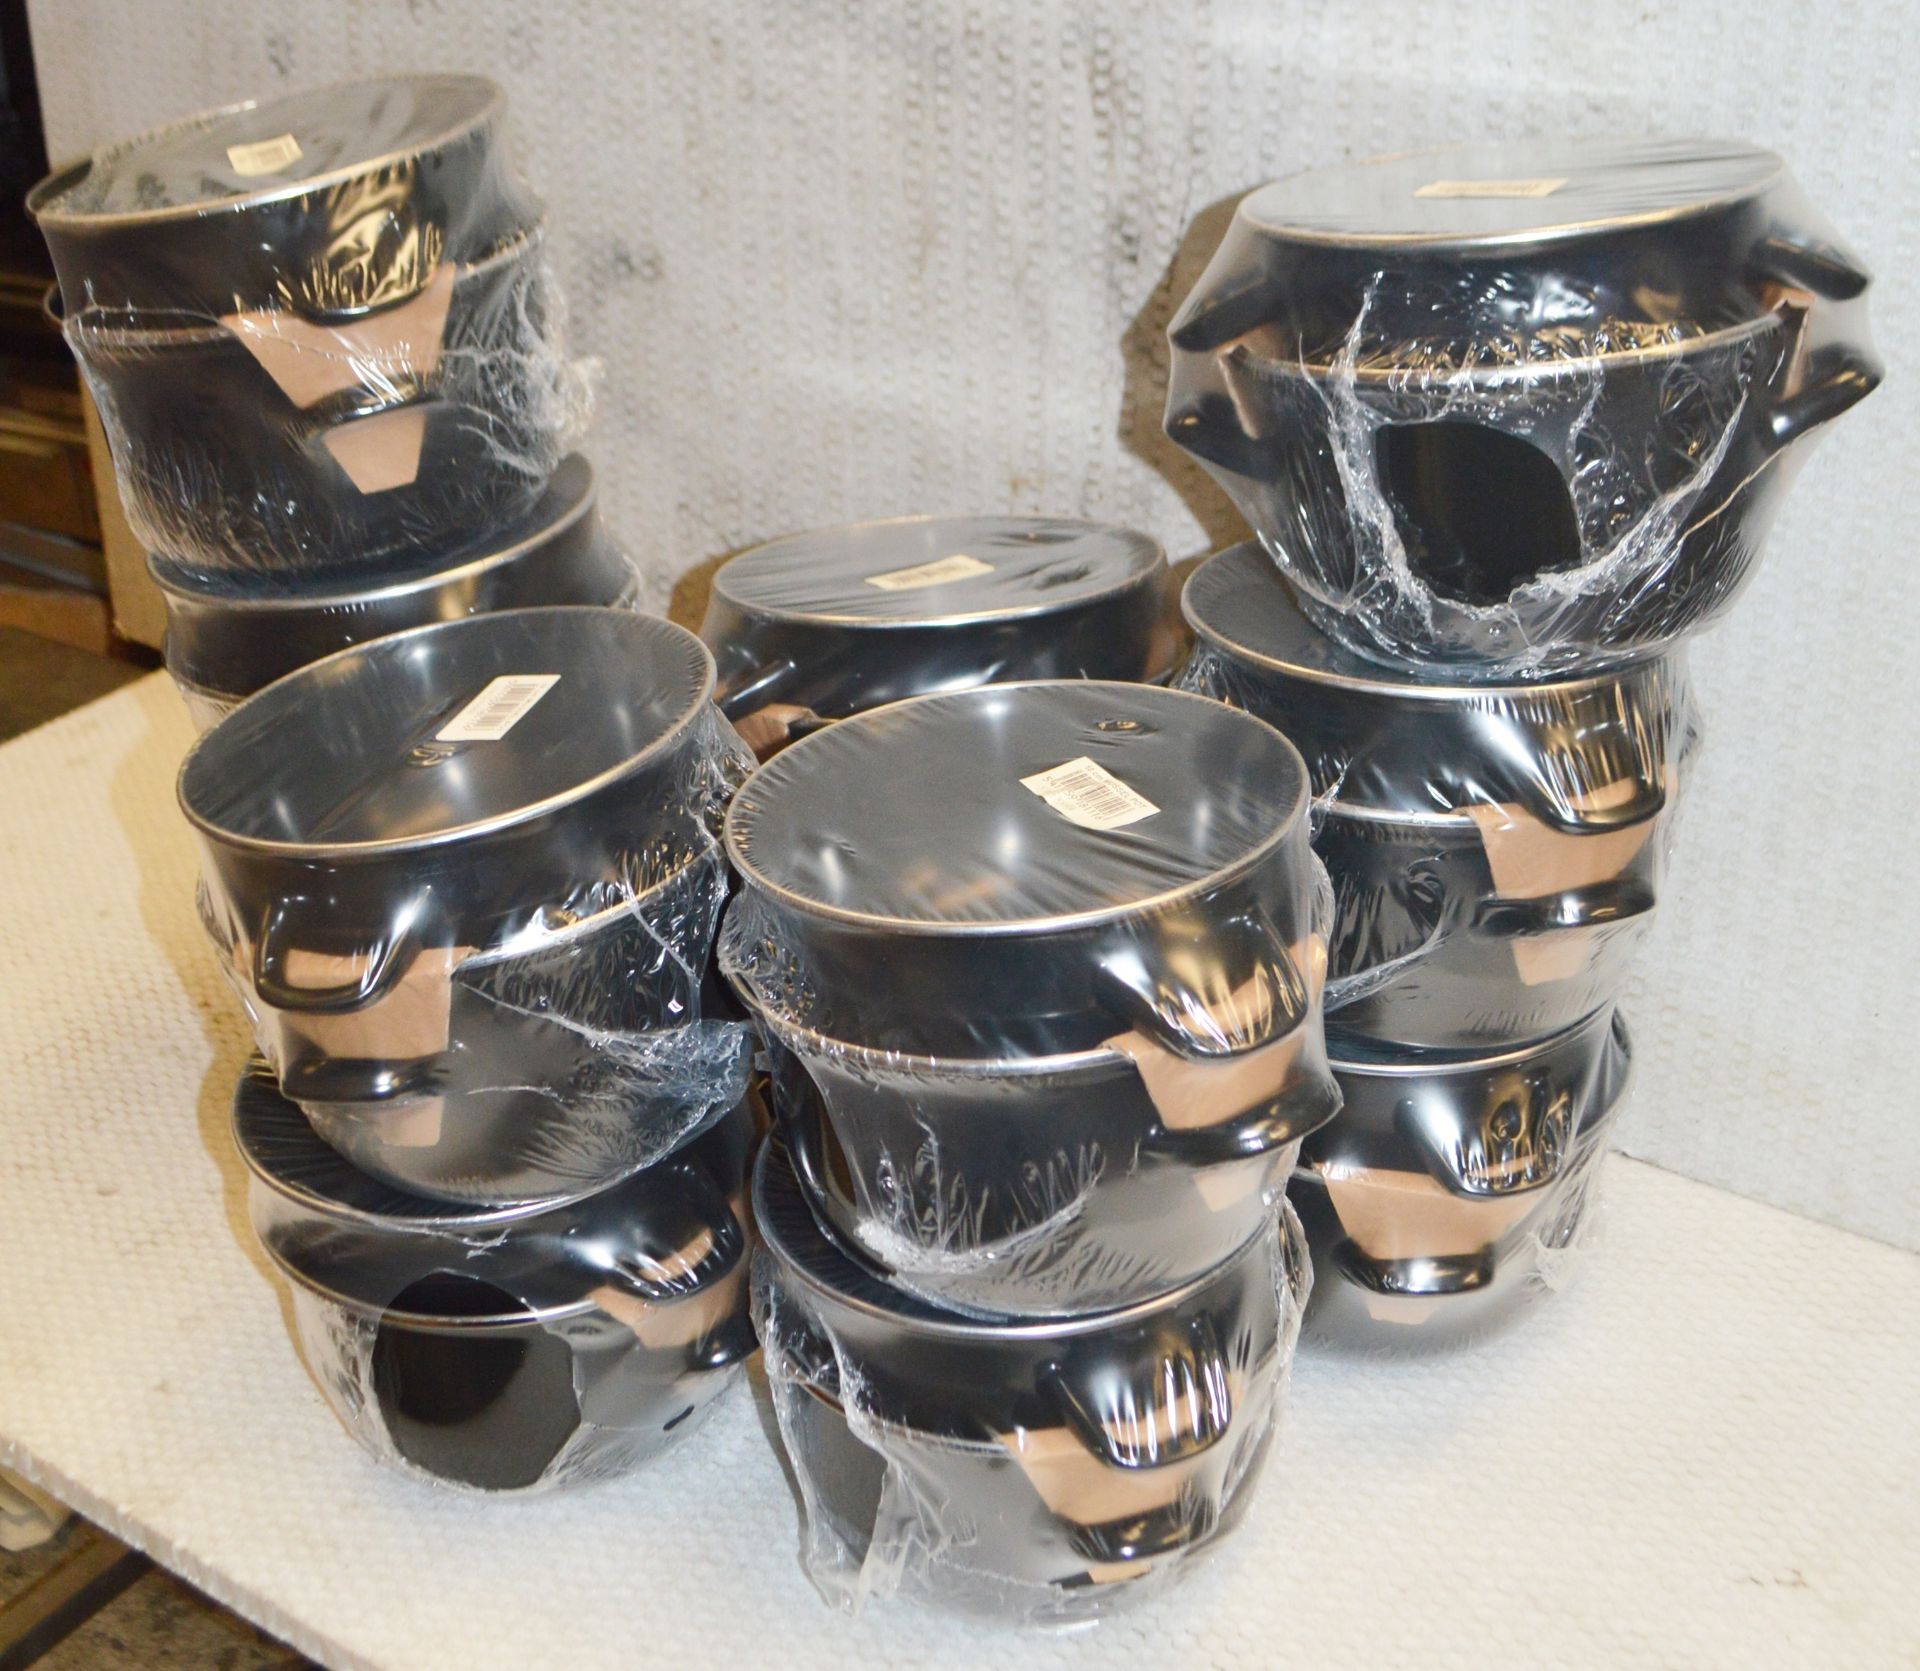 12 x Mussel Serving Dish Sets in Black - New and Unused - Recently Removed From a Commercial - Image 4 of 4